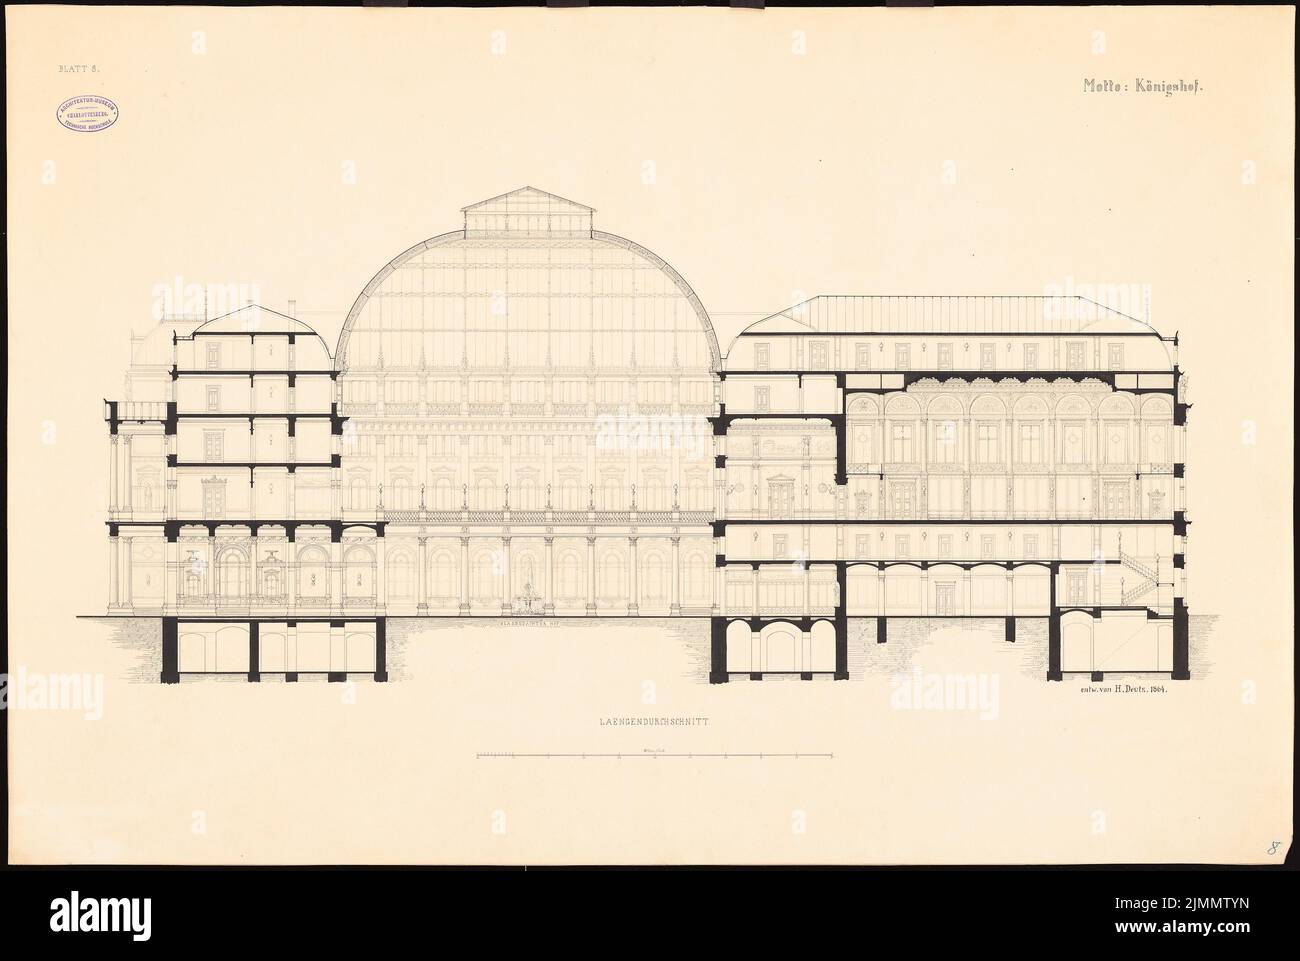 Deutz Heinrich, Gasthof 1. Rang for Berlin. Schinkel competition 1865 (1864): longitudinal section with interior view. Ink on cardboard, 64 x 95.4 cm (including scan edges) Stock Photo